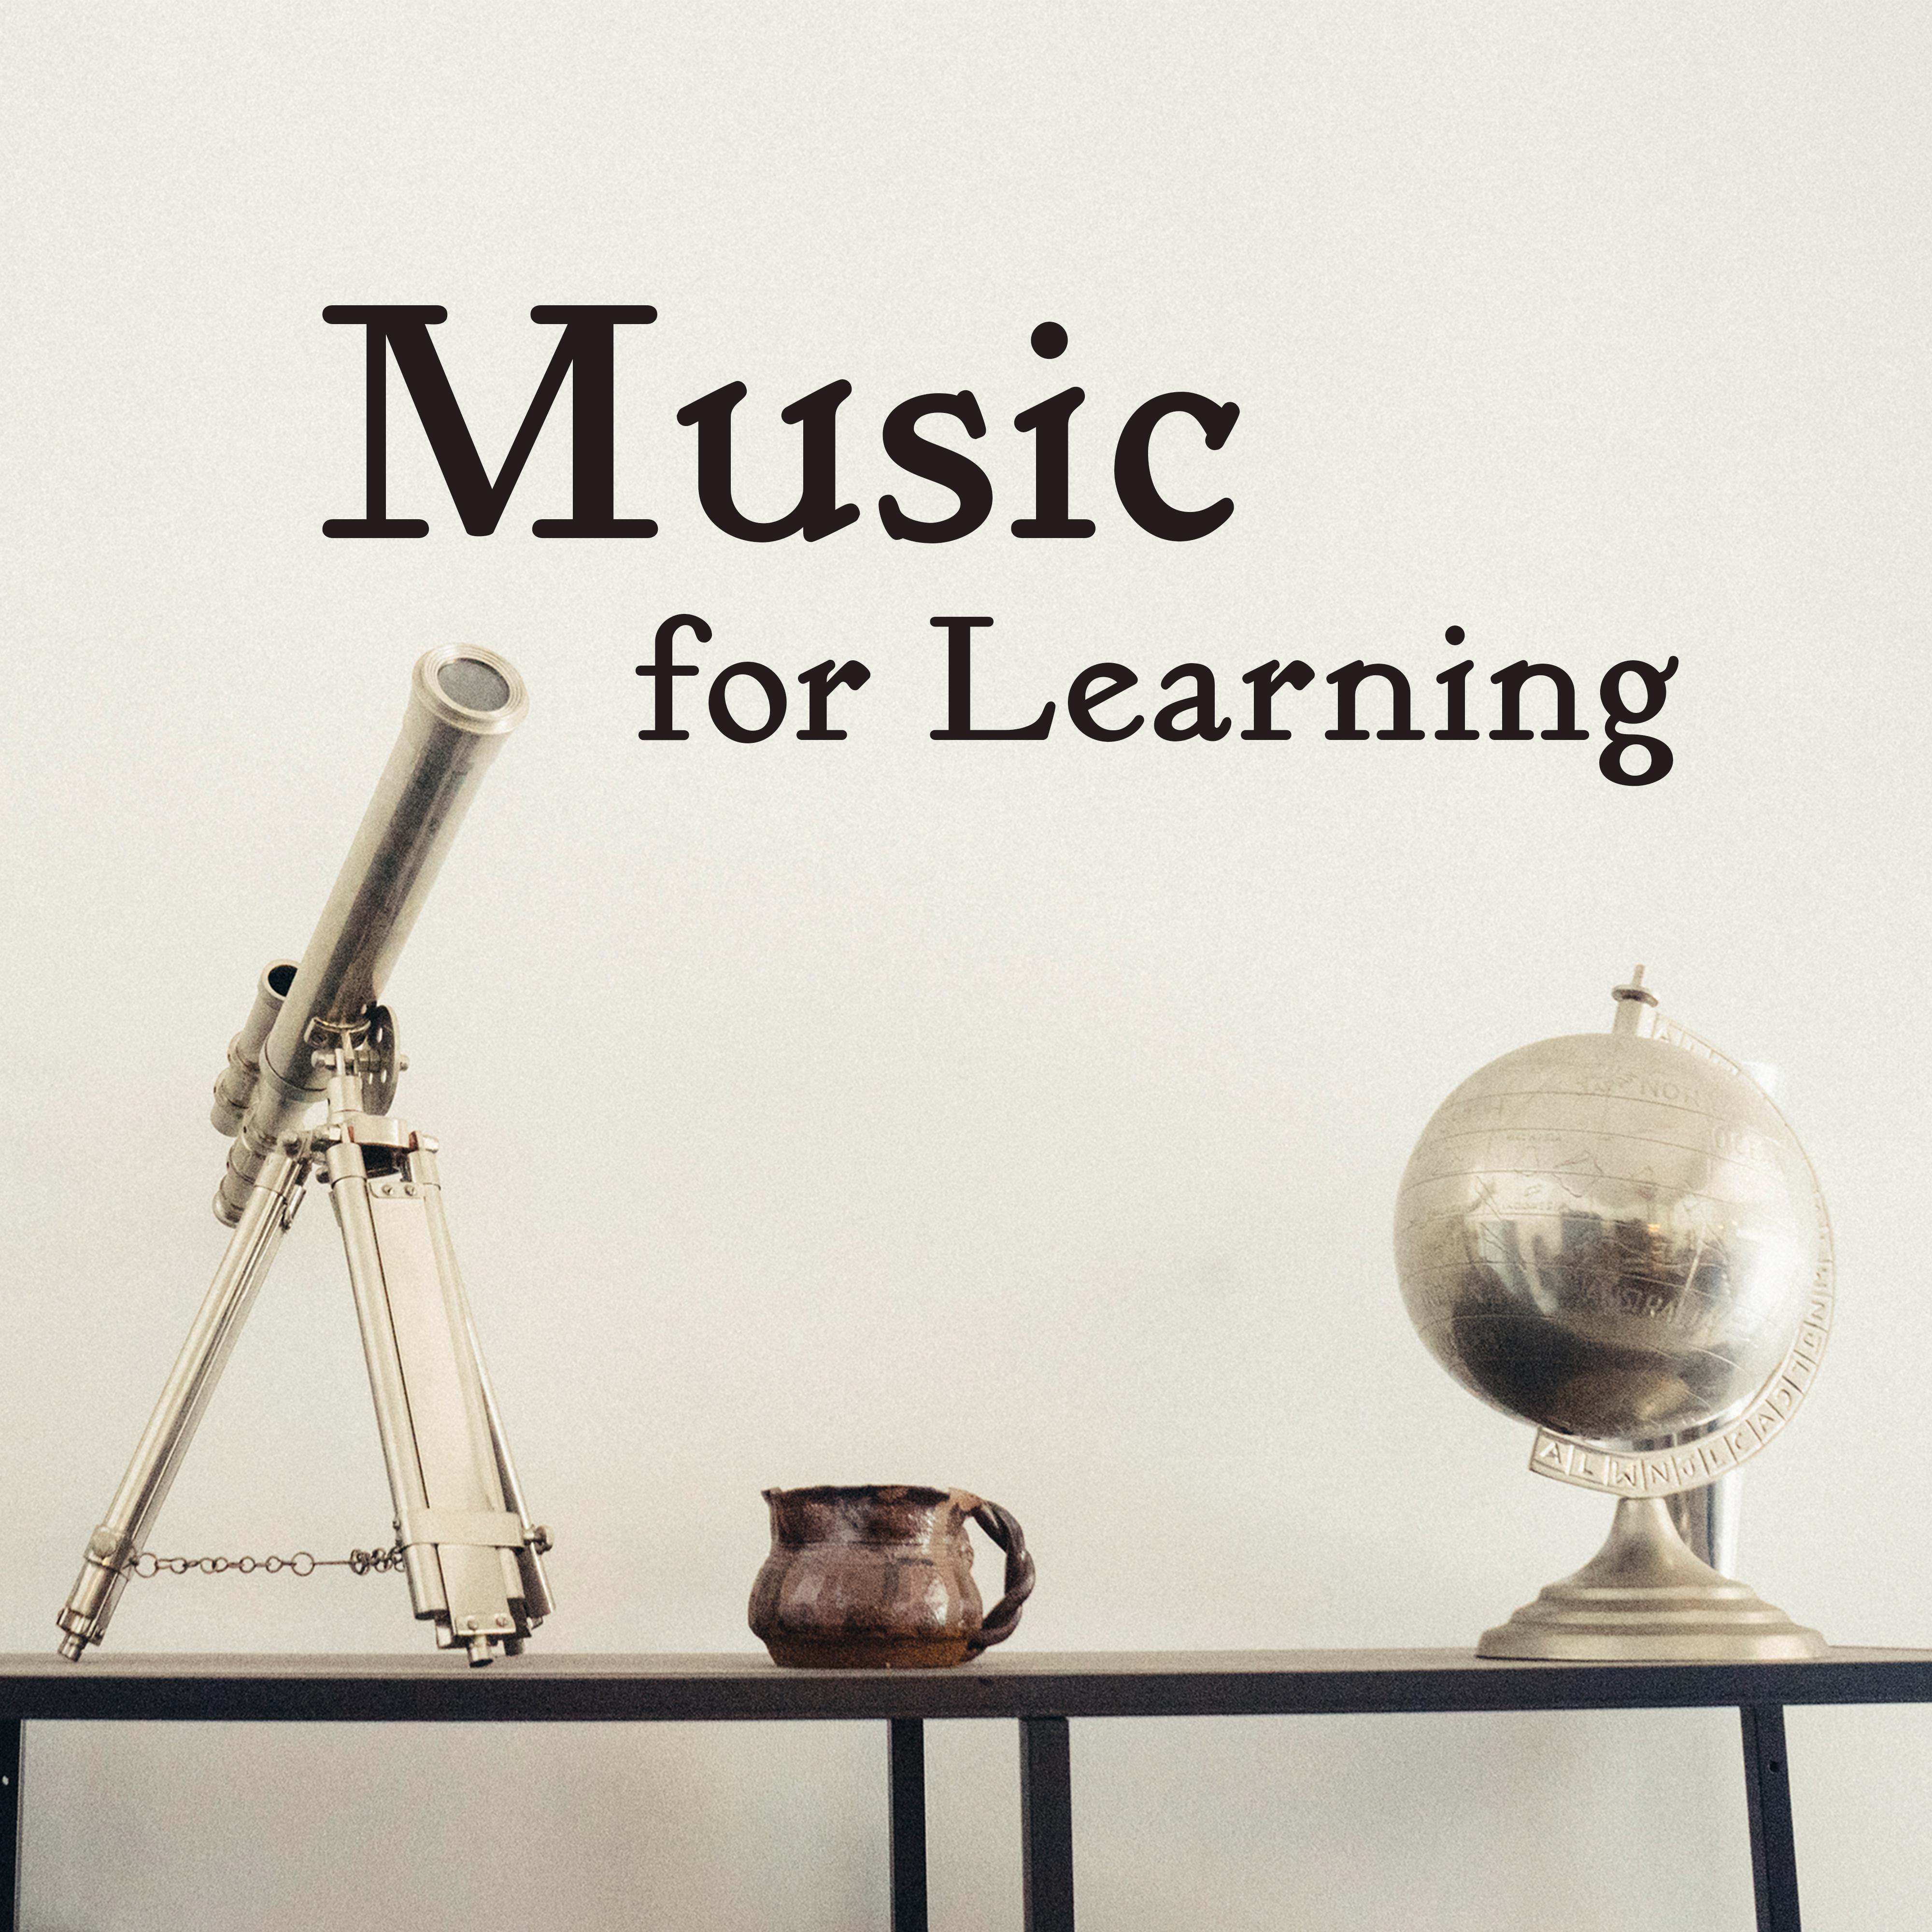 Music for Learning – Classic Music for Learning, Reading, Study, Keep Focus, Easy Work